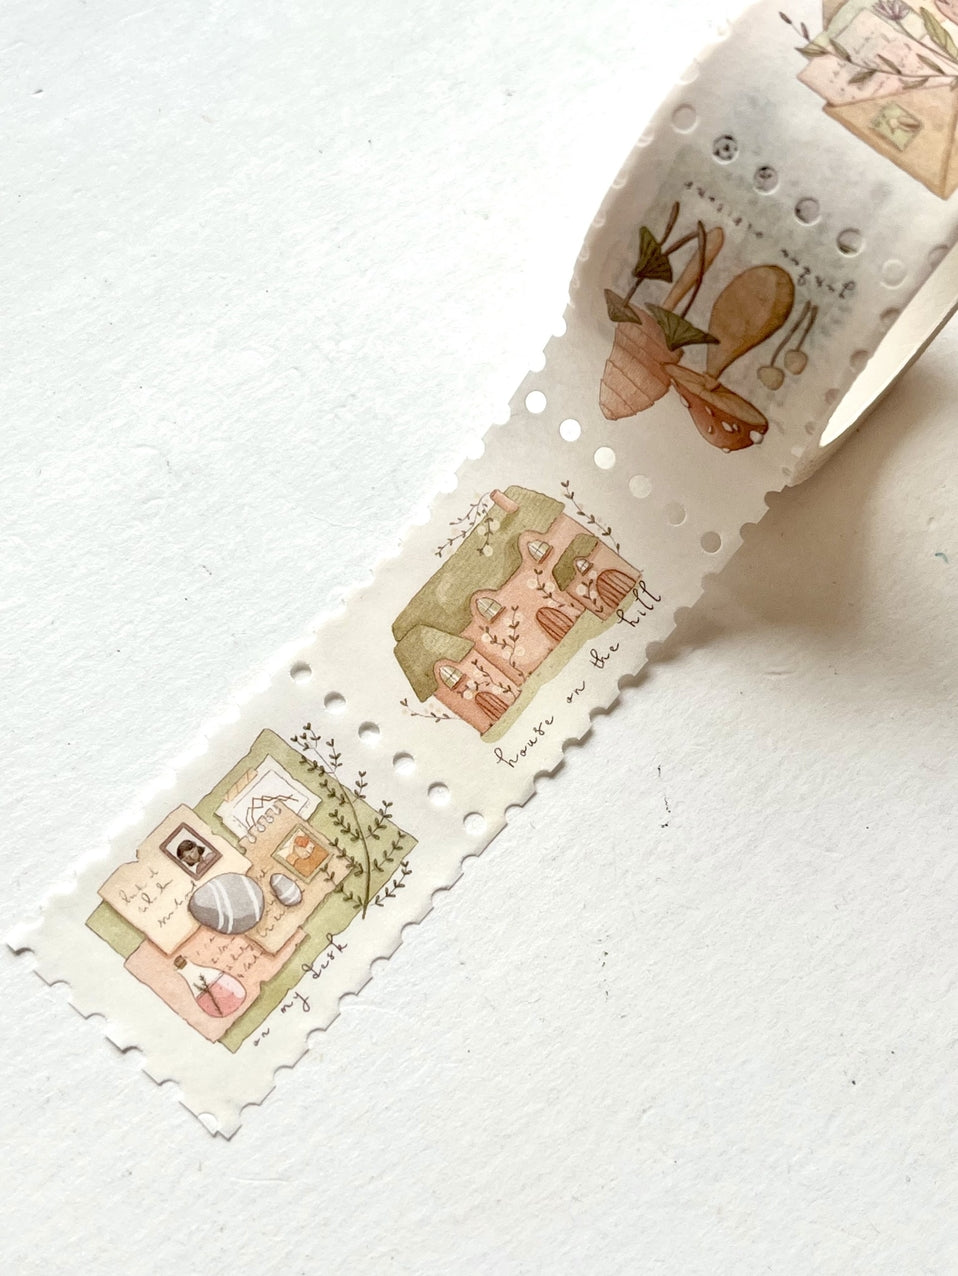 Nikki Dotti Washi Tape - Postage Stamp - At Home Beautiful washitape with muted illustrations that can be used as postage stamp look-a-like stickers